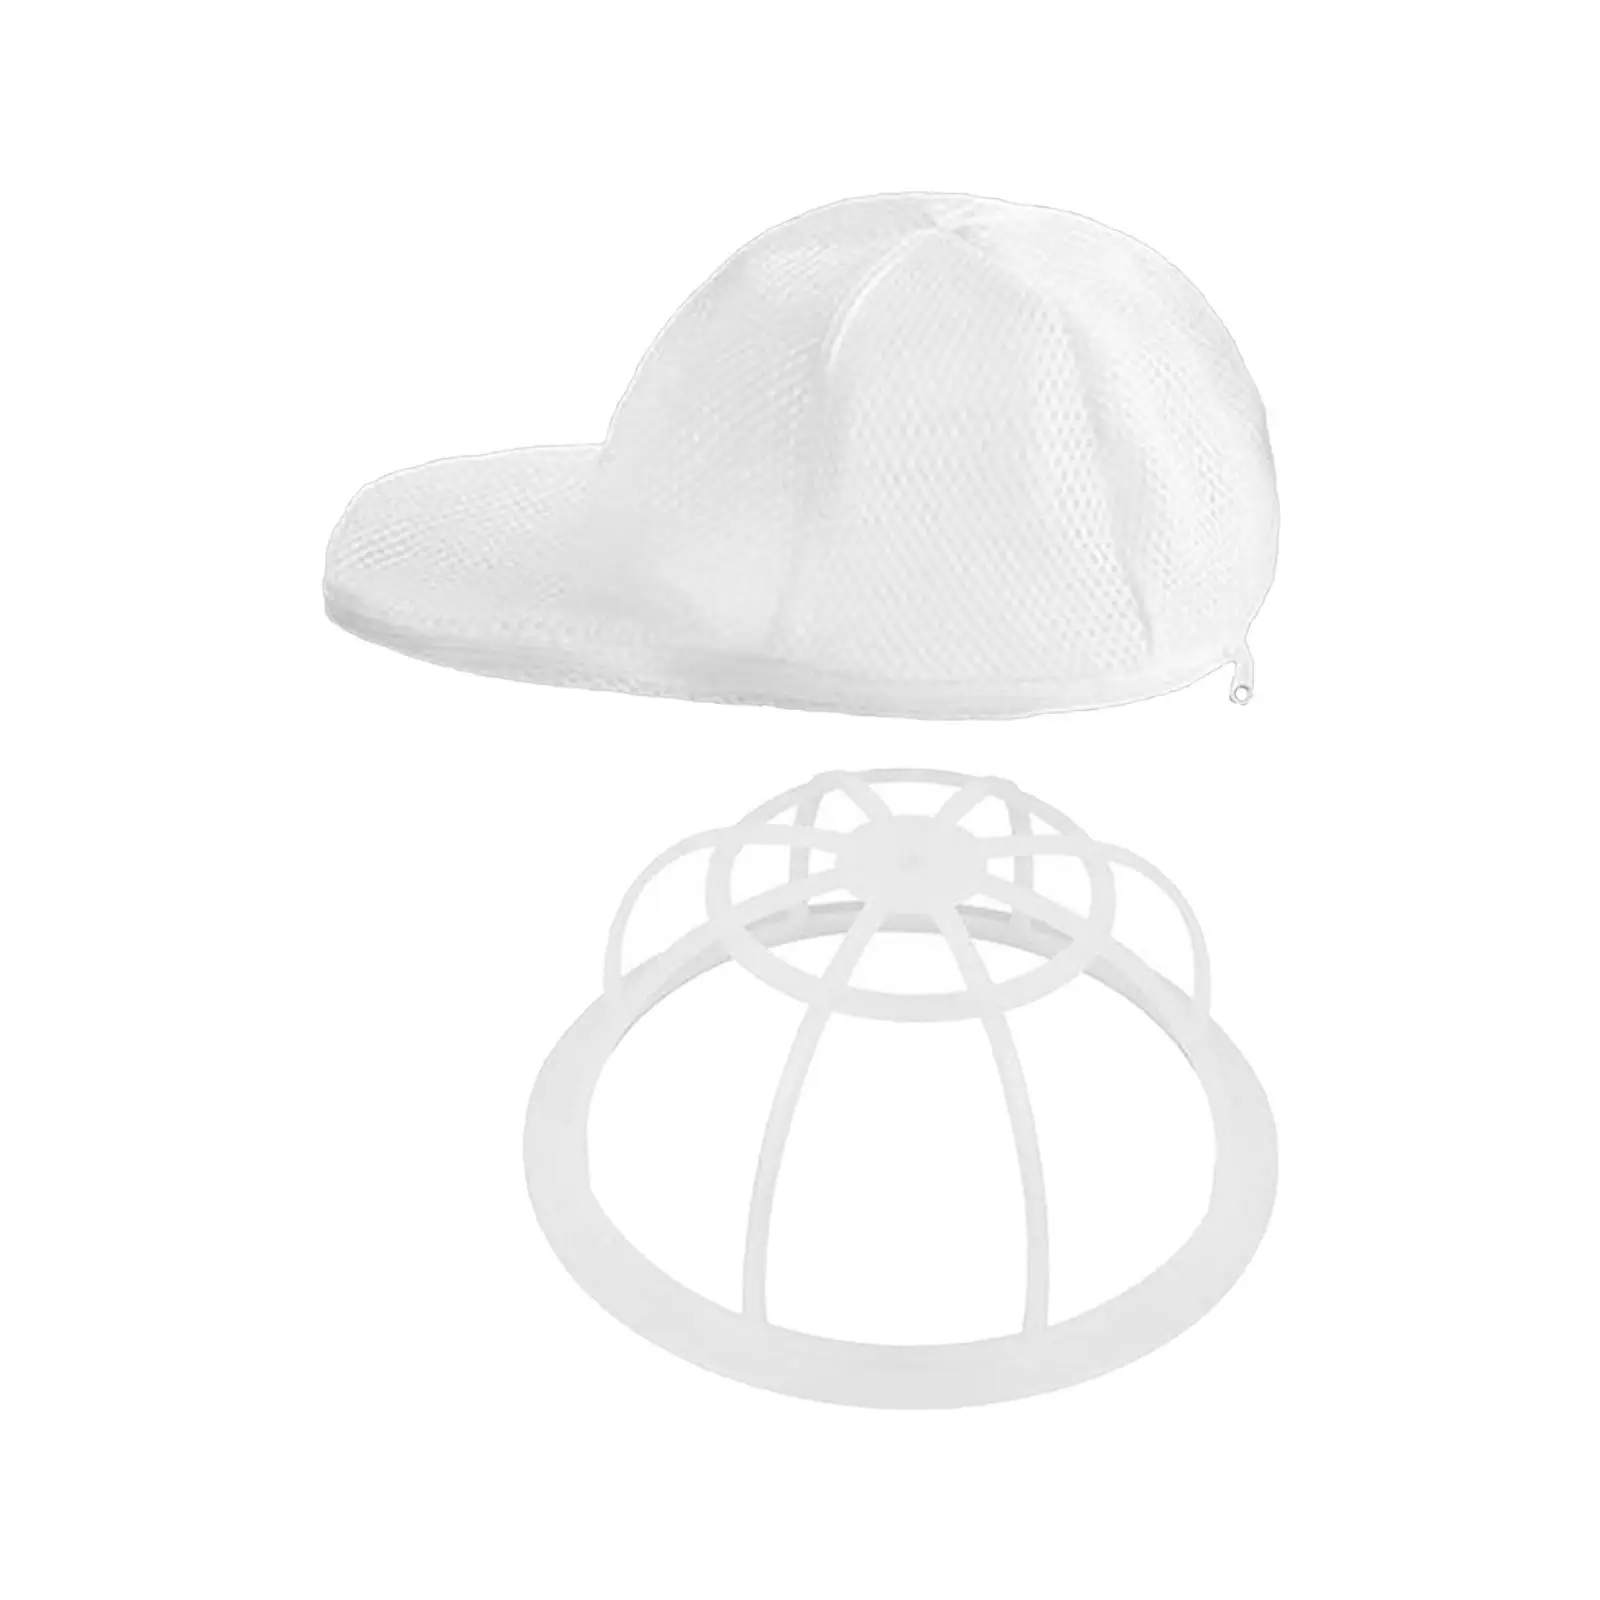 Hat Washer Detachable Portable 2 in 1 Washing Hat Cage for Washing Machine